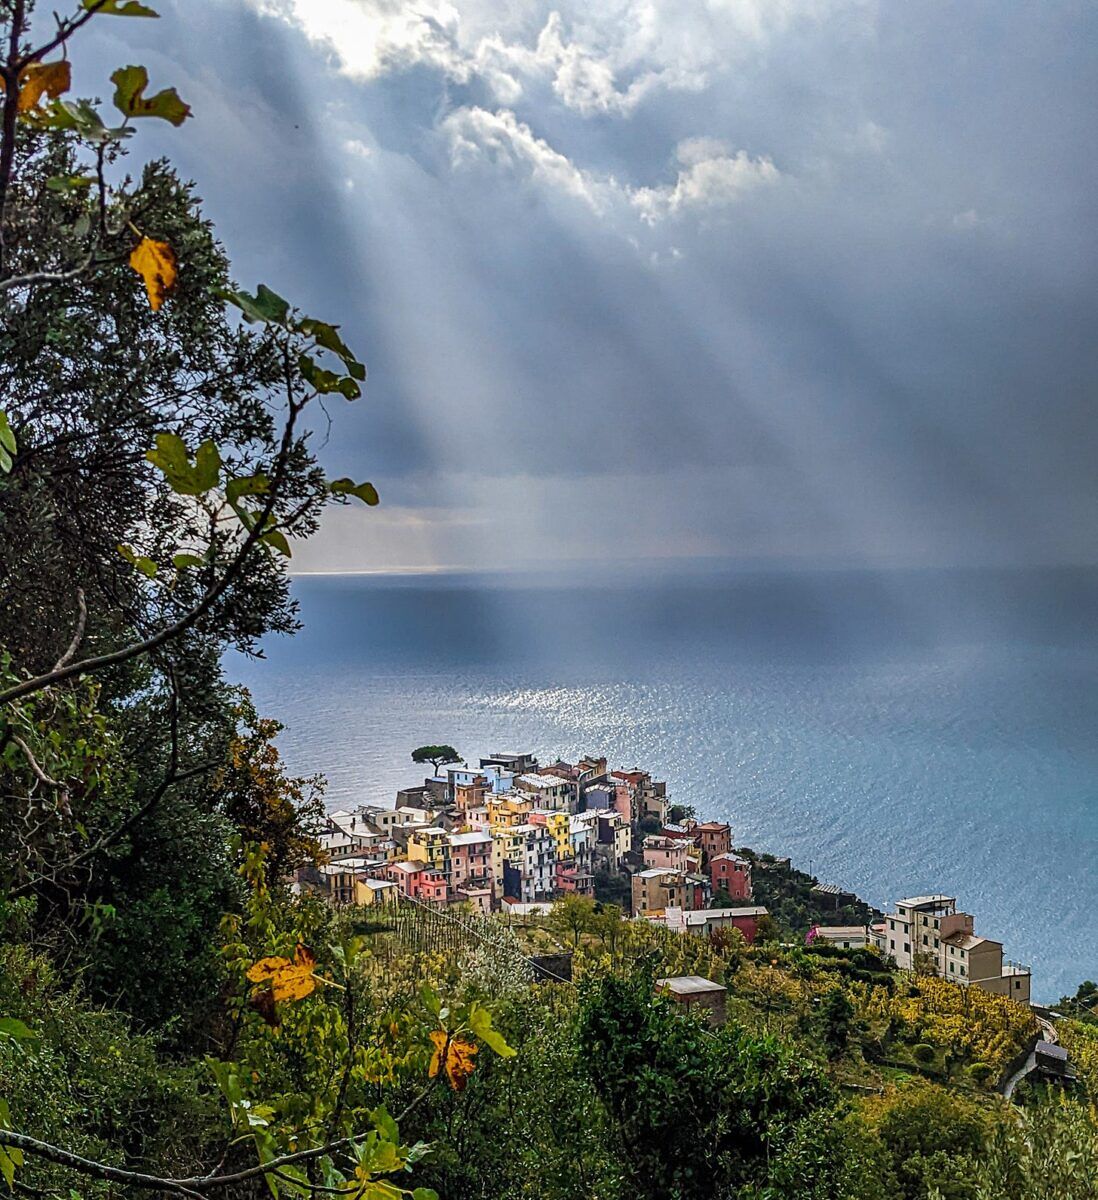 A view of the village of Corniglia in Italy’s Cinque Terre from a distance. The photographer is on the side of a mountain and the sea is behind the village.